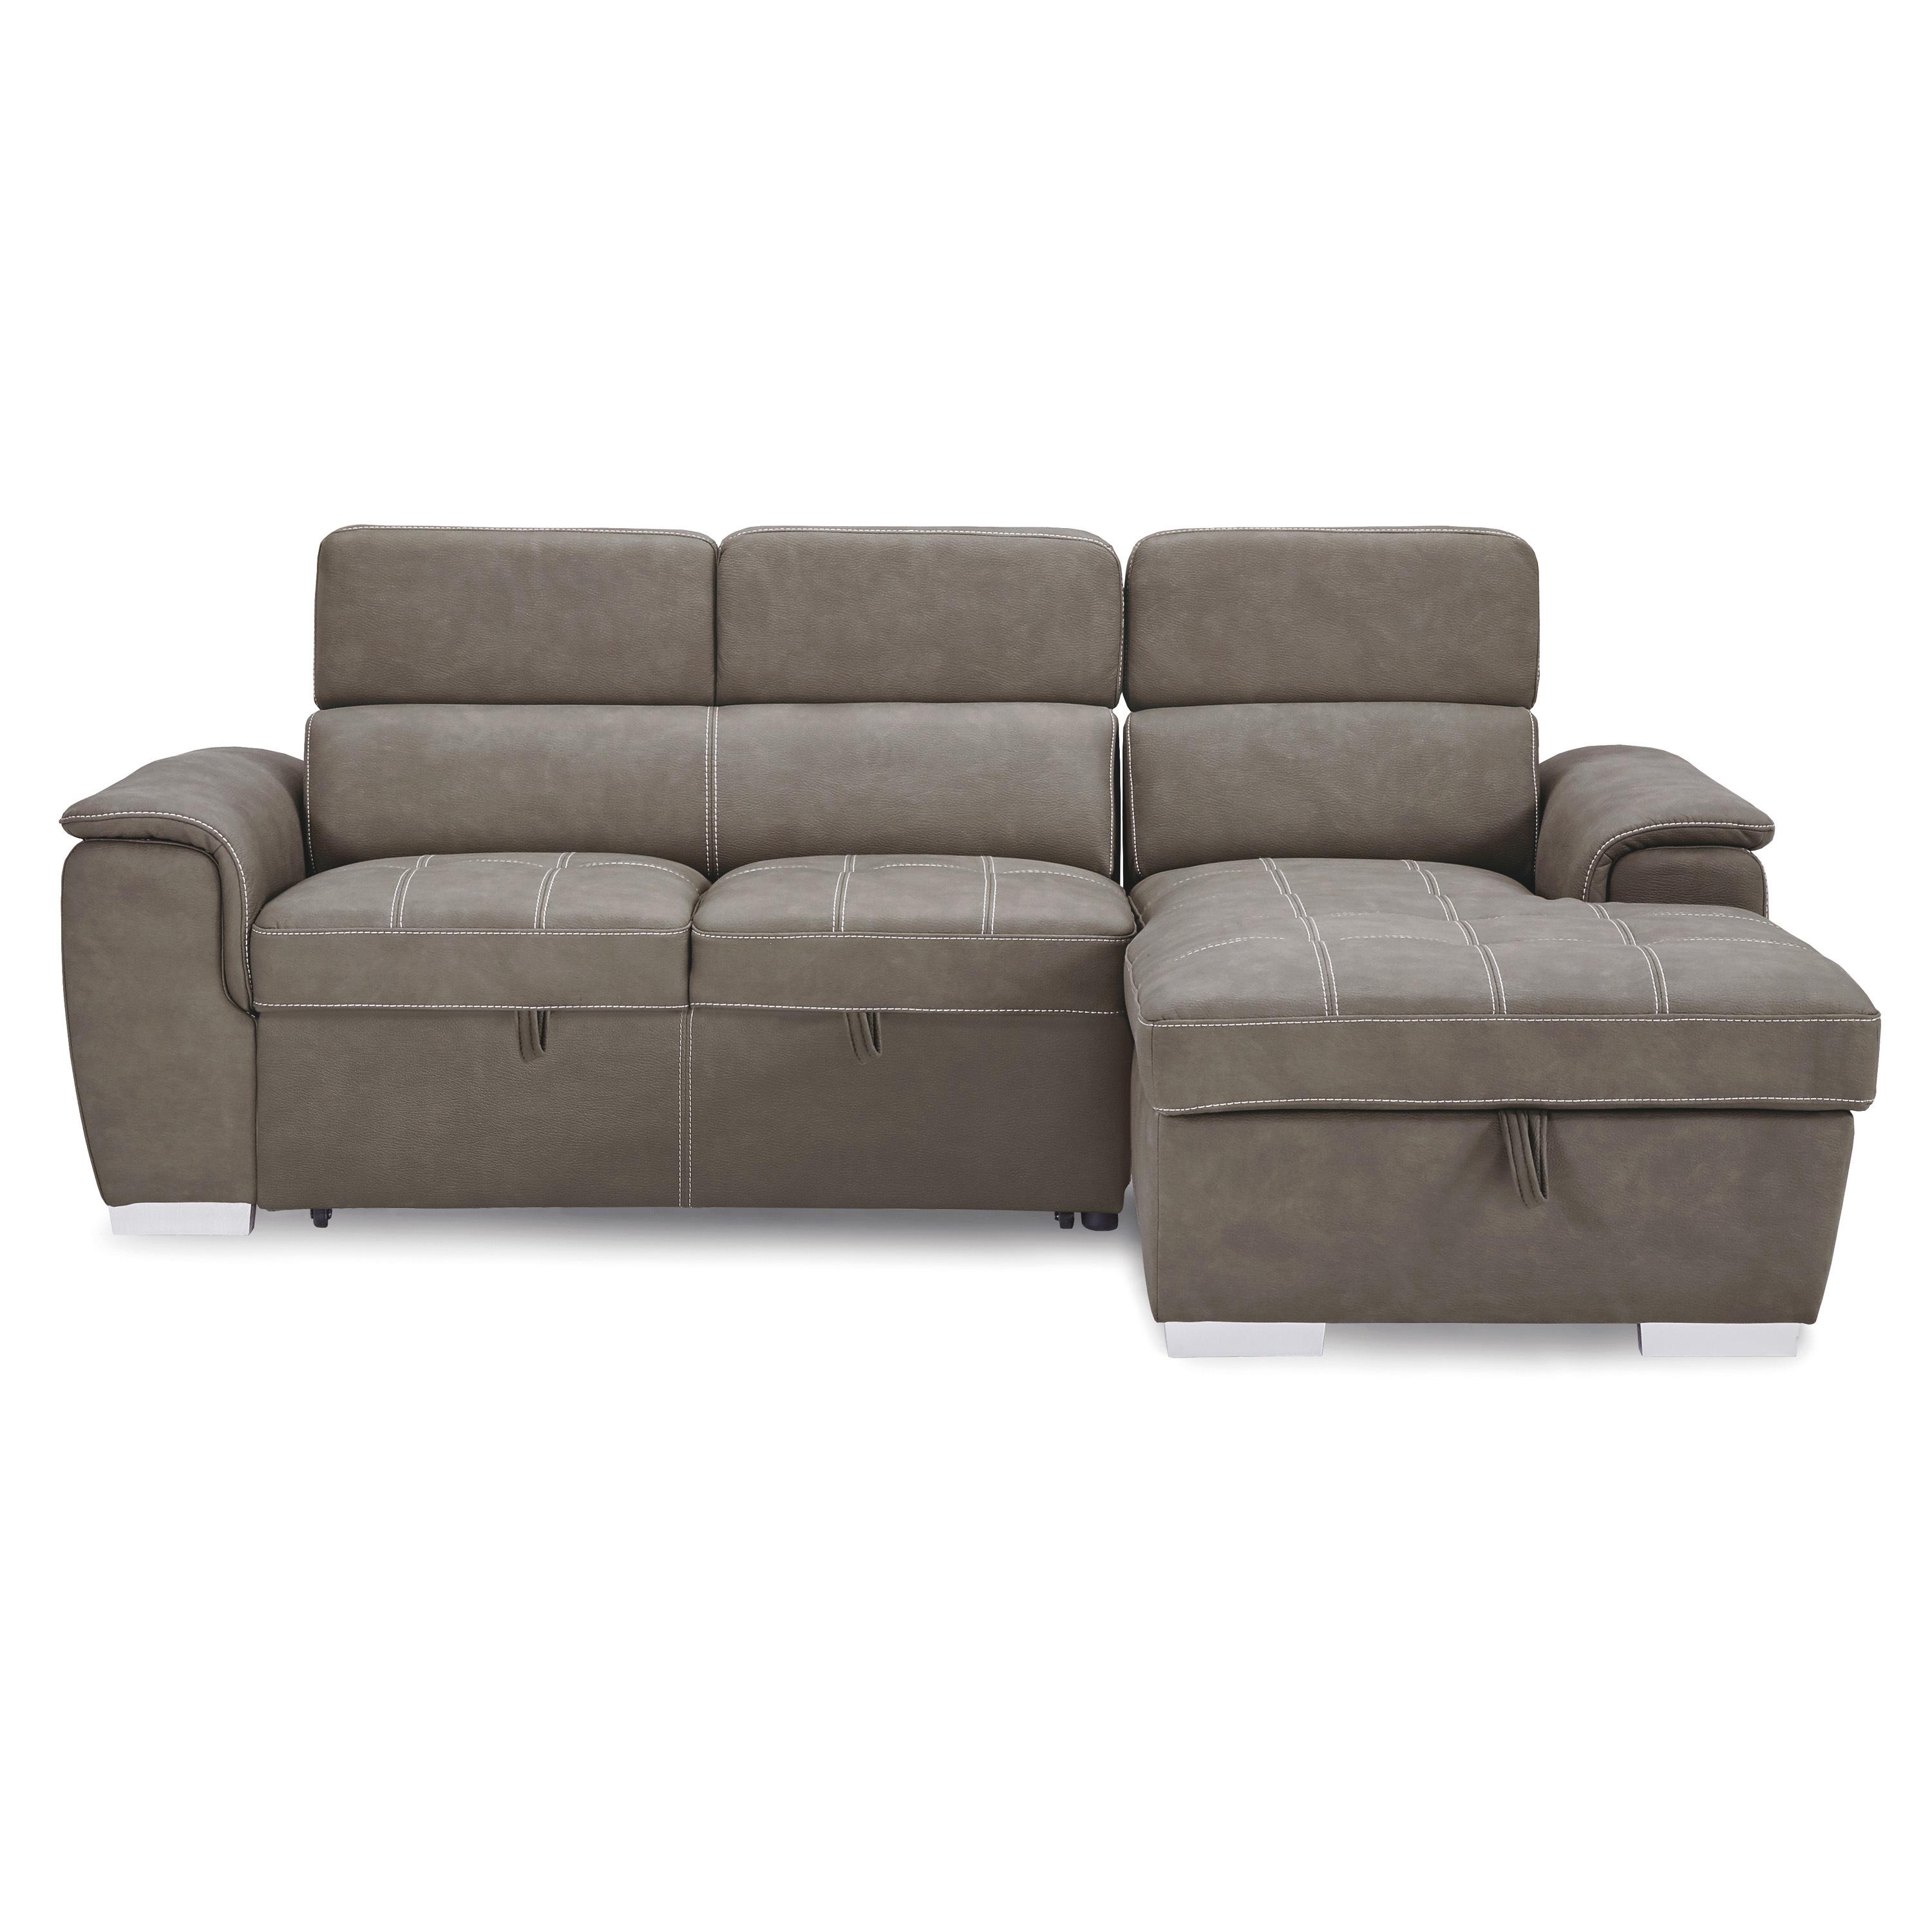 Contemporary Sectional 8228TP* Ferriday 8228TP* in Taupe Microfiber